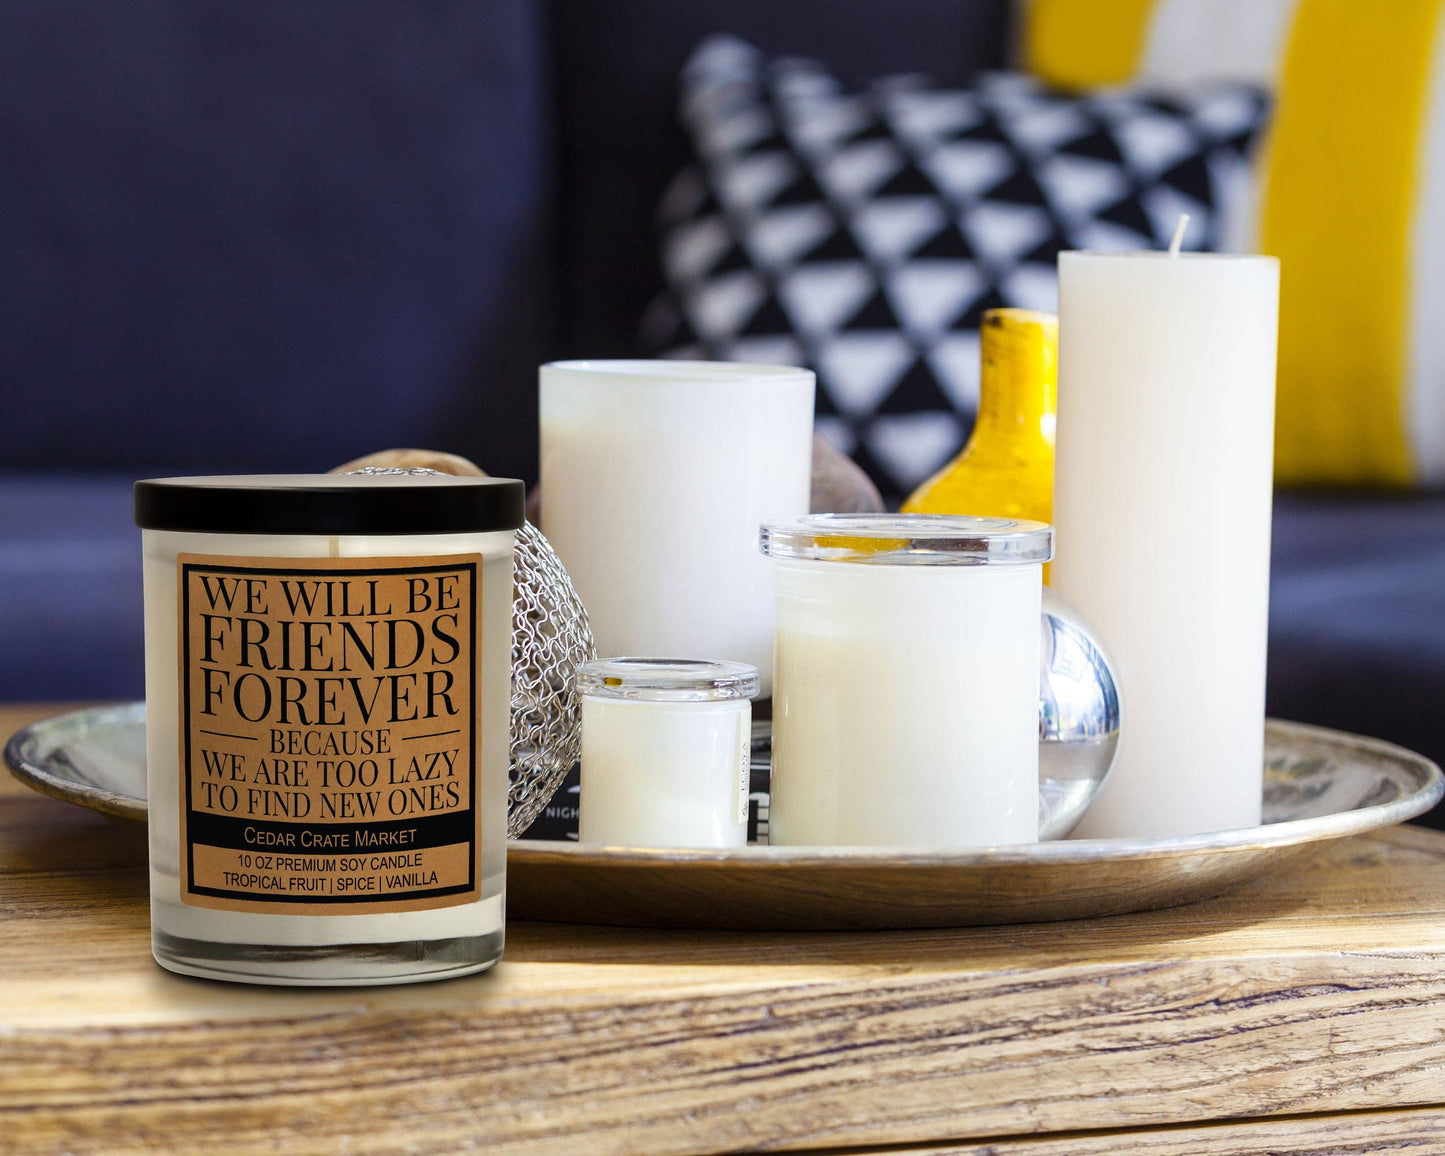 We Will Be Friends Forever Soy Candle